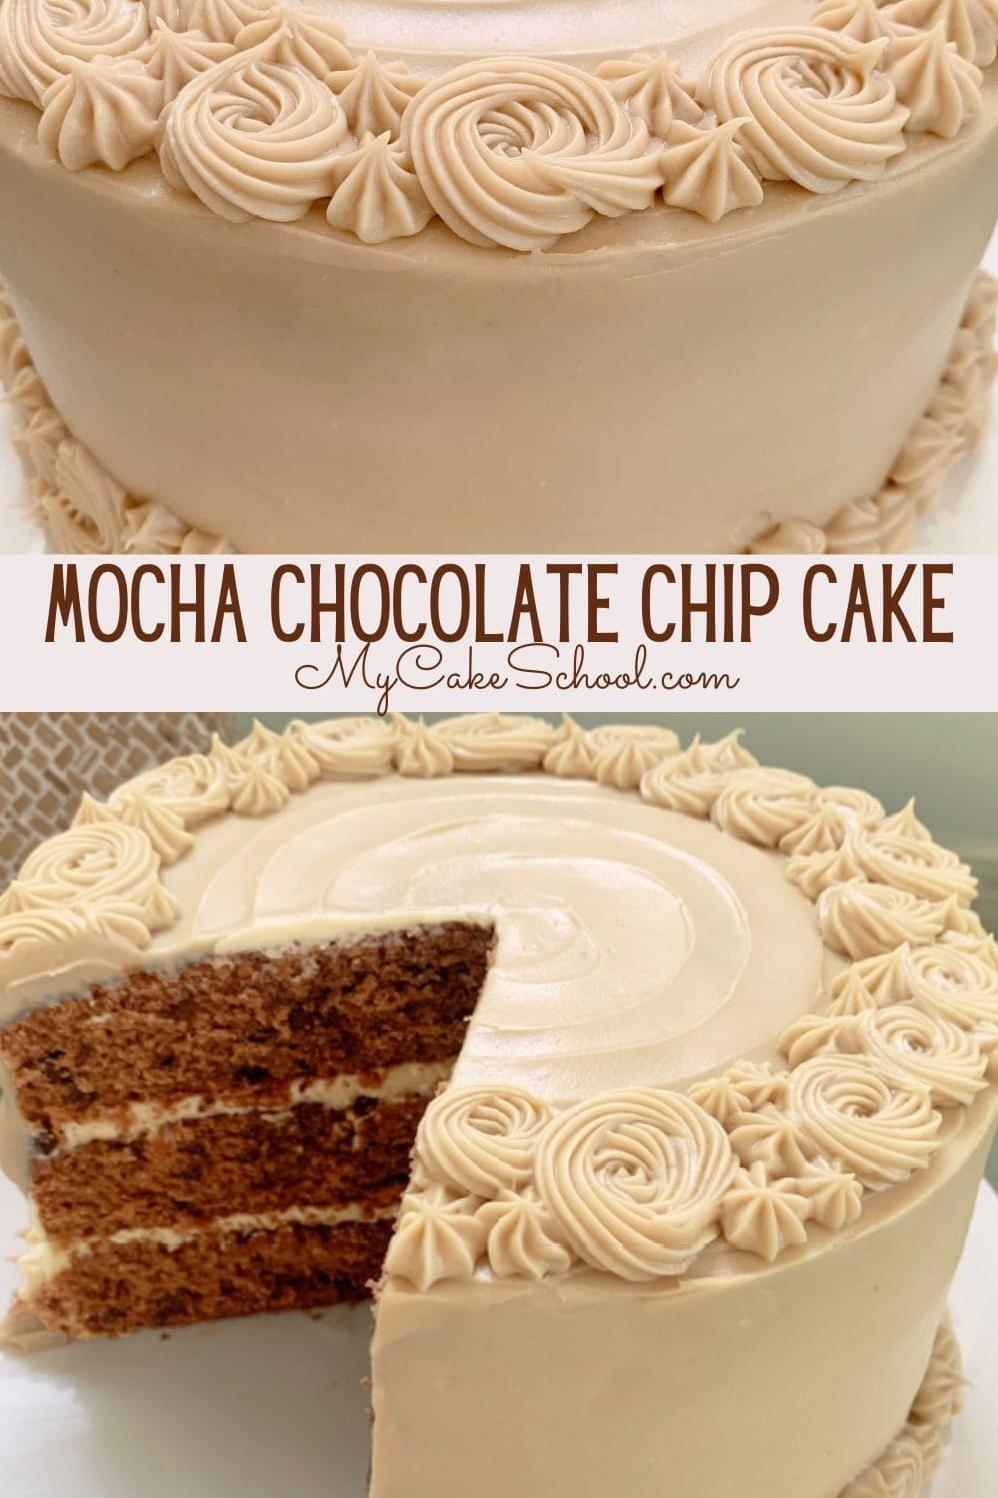  Layers of moist chocolate cake and creamy latte frosting make for a heavenly combination.